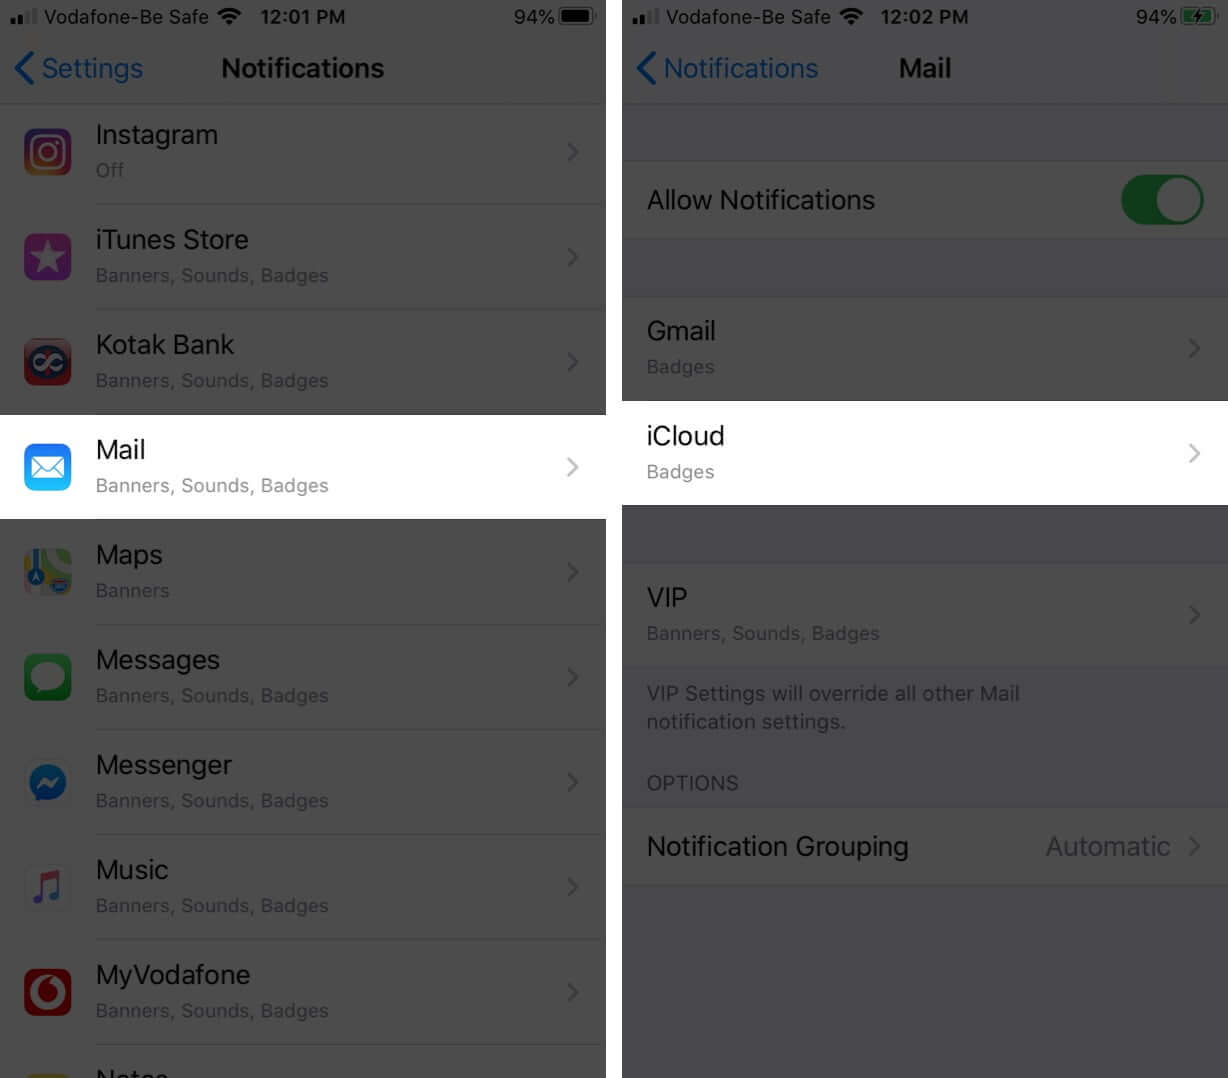 Tap on Mail and Select iCloud in Notifications on iPhone